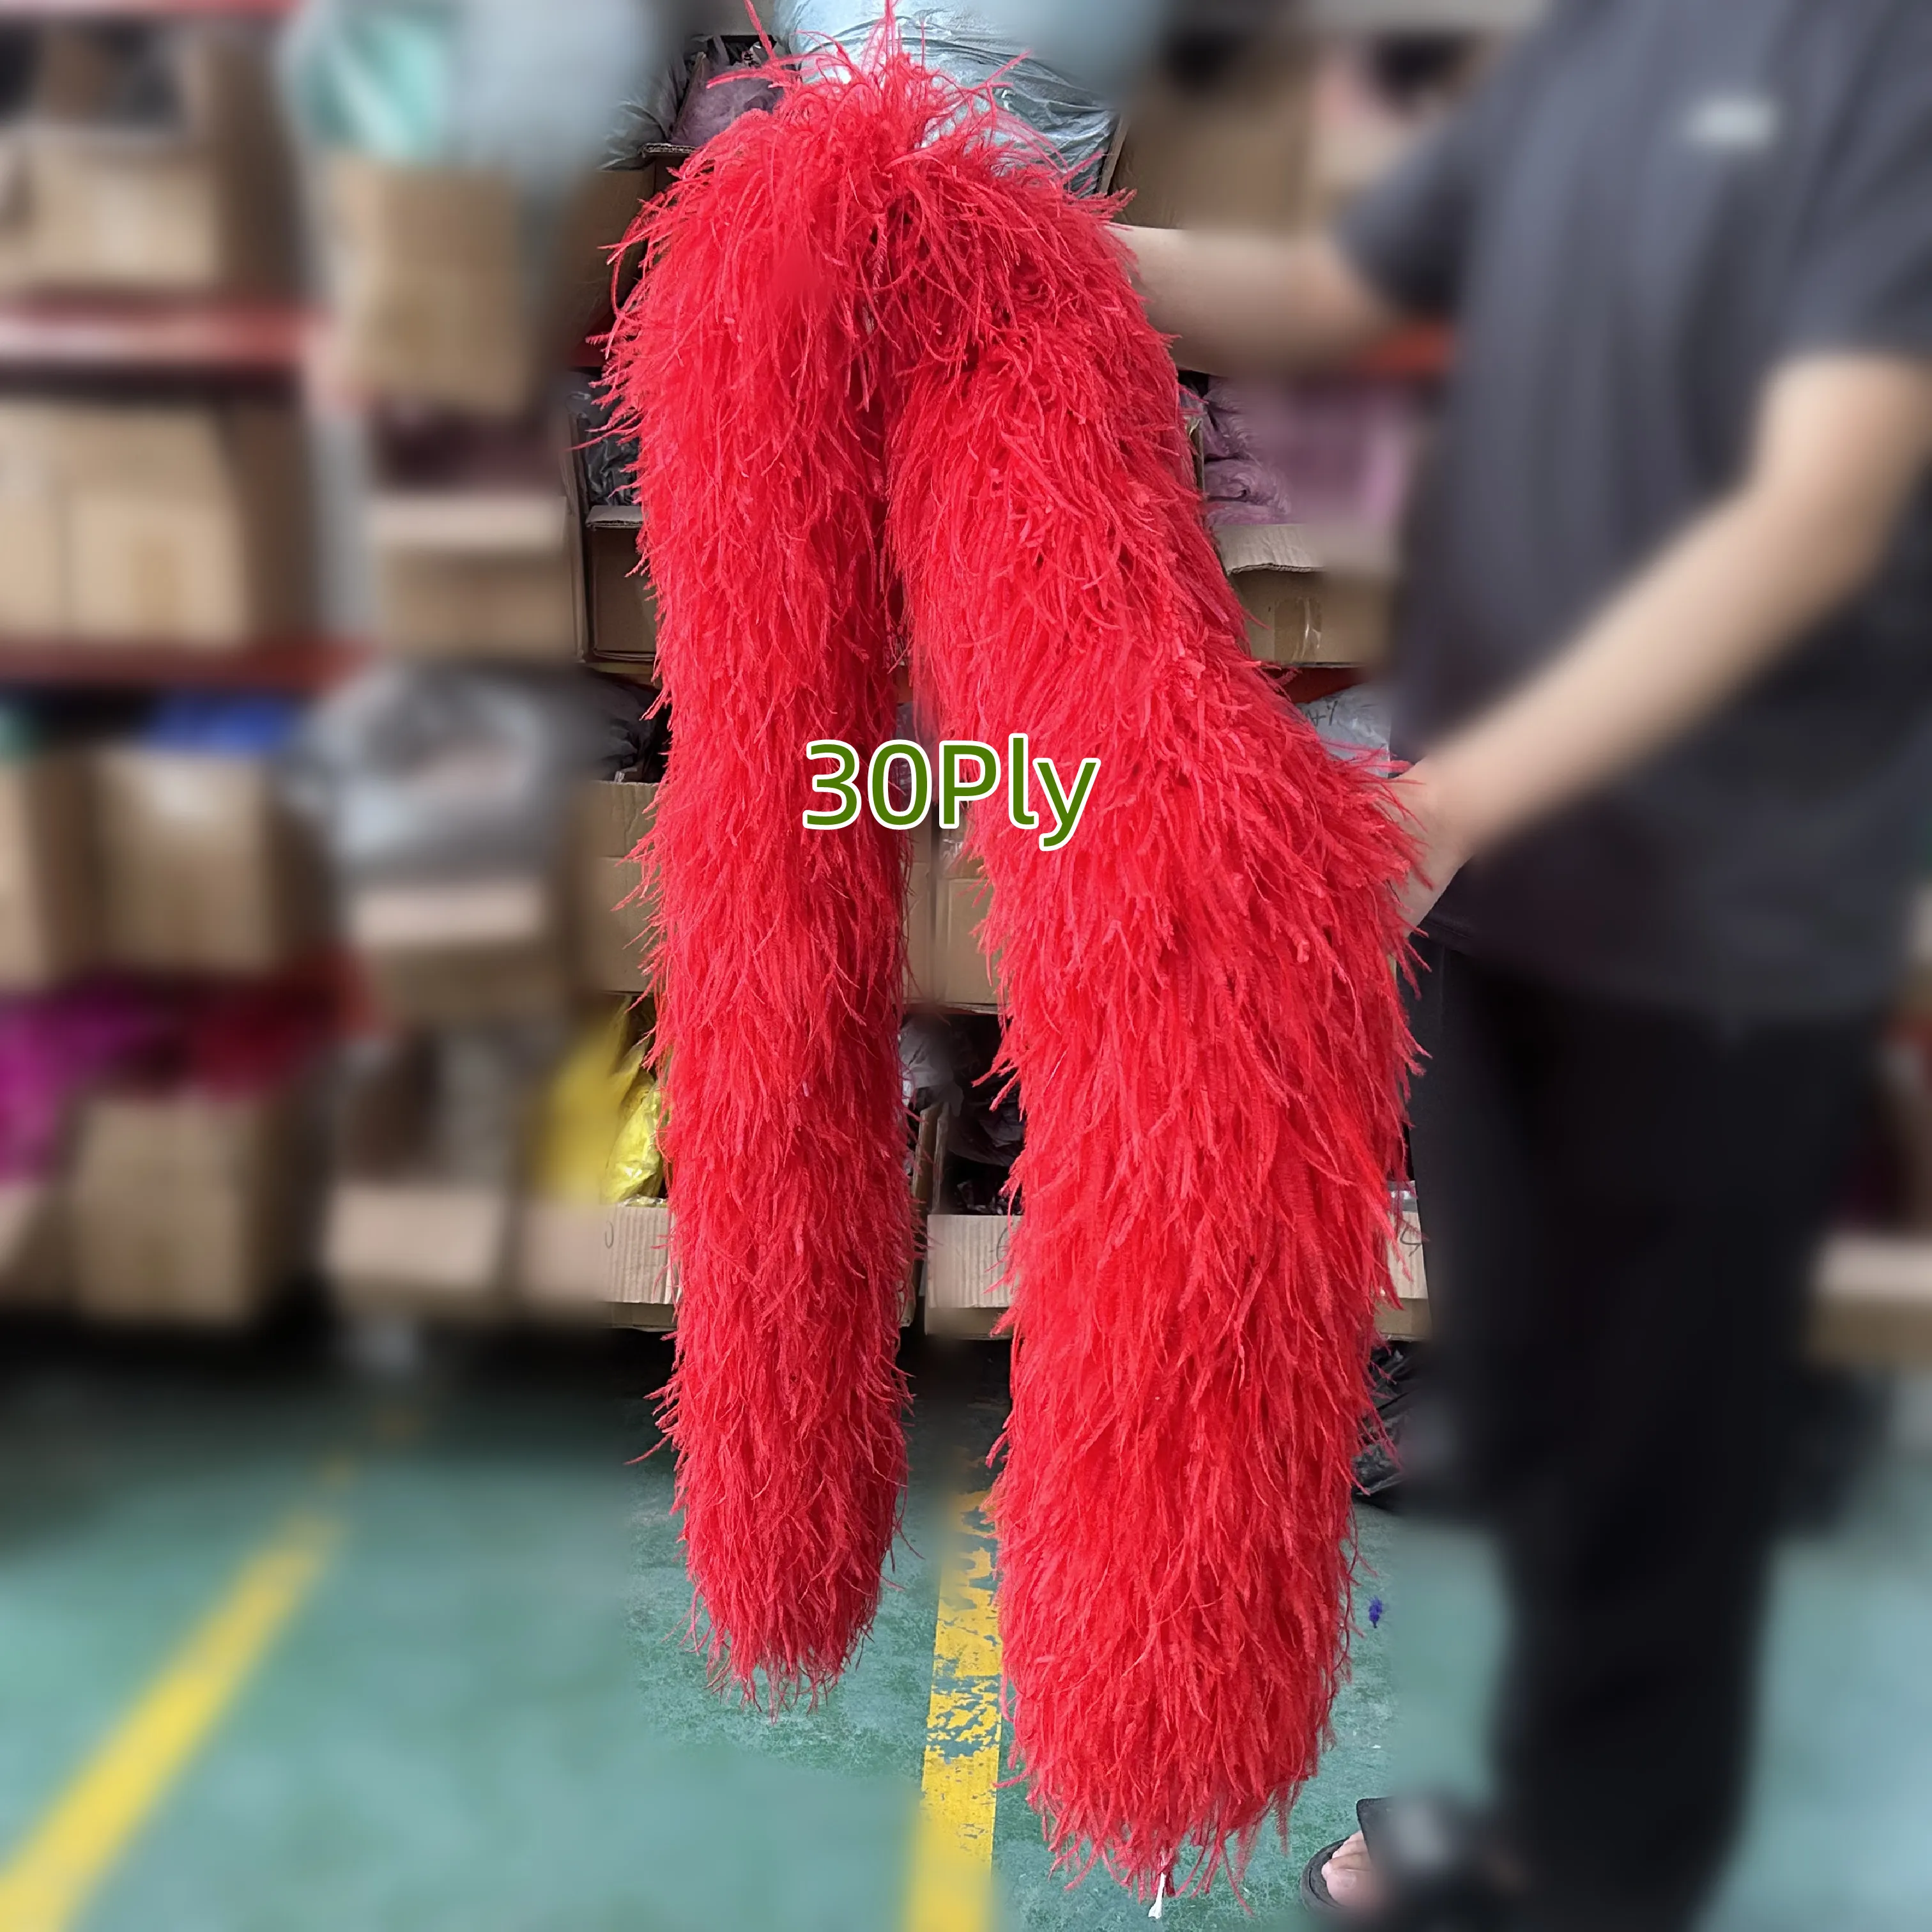 3Meter Fluffy Ostrich Feather Boa Shawl Natural Ostrich Plume